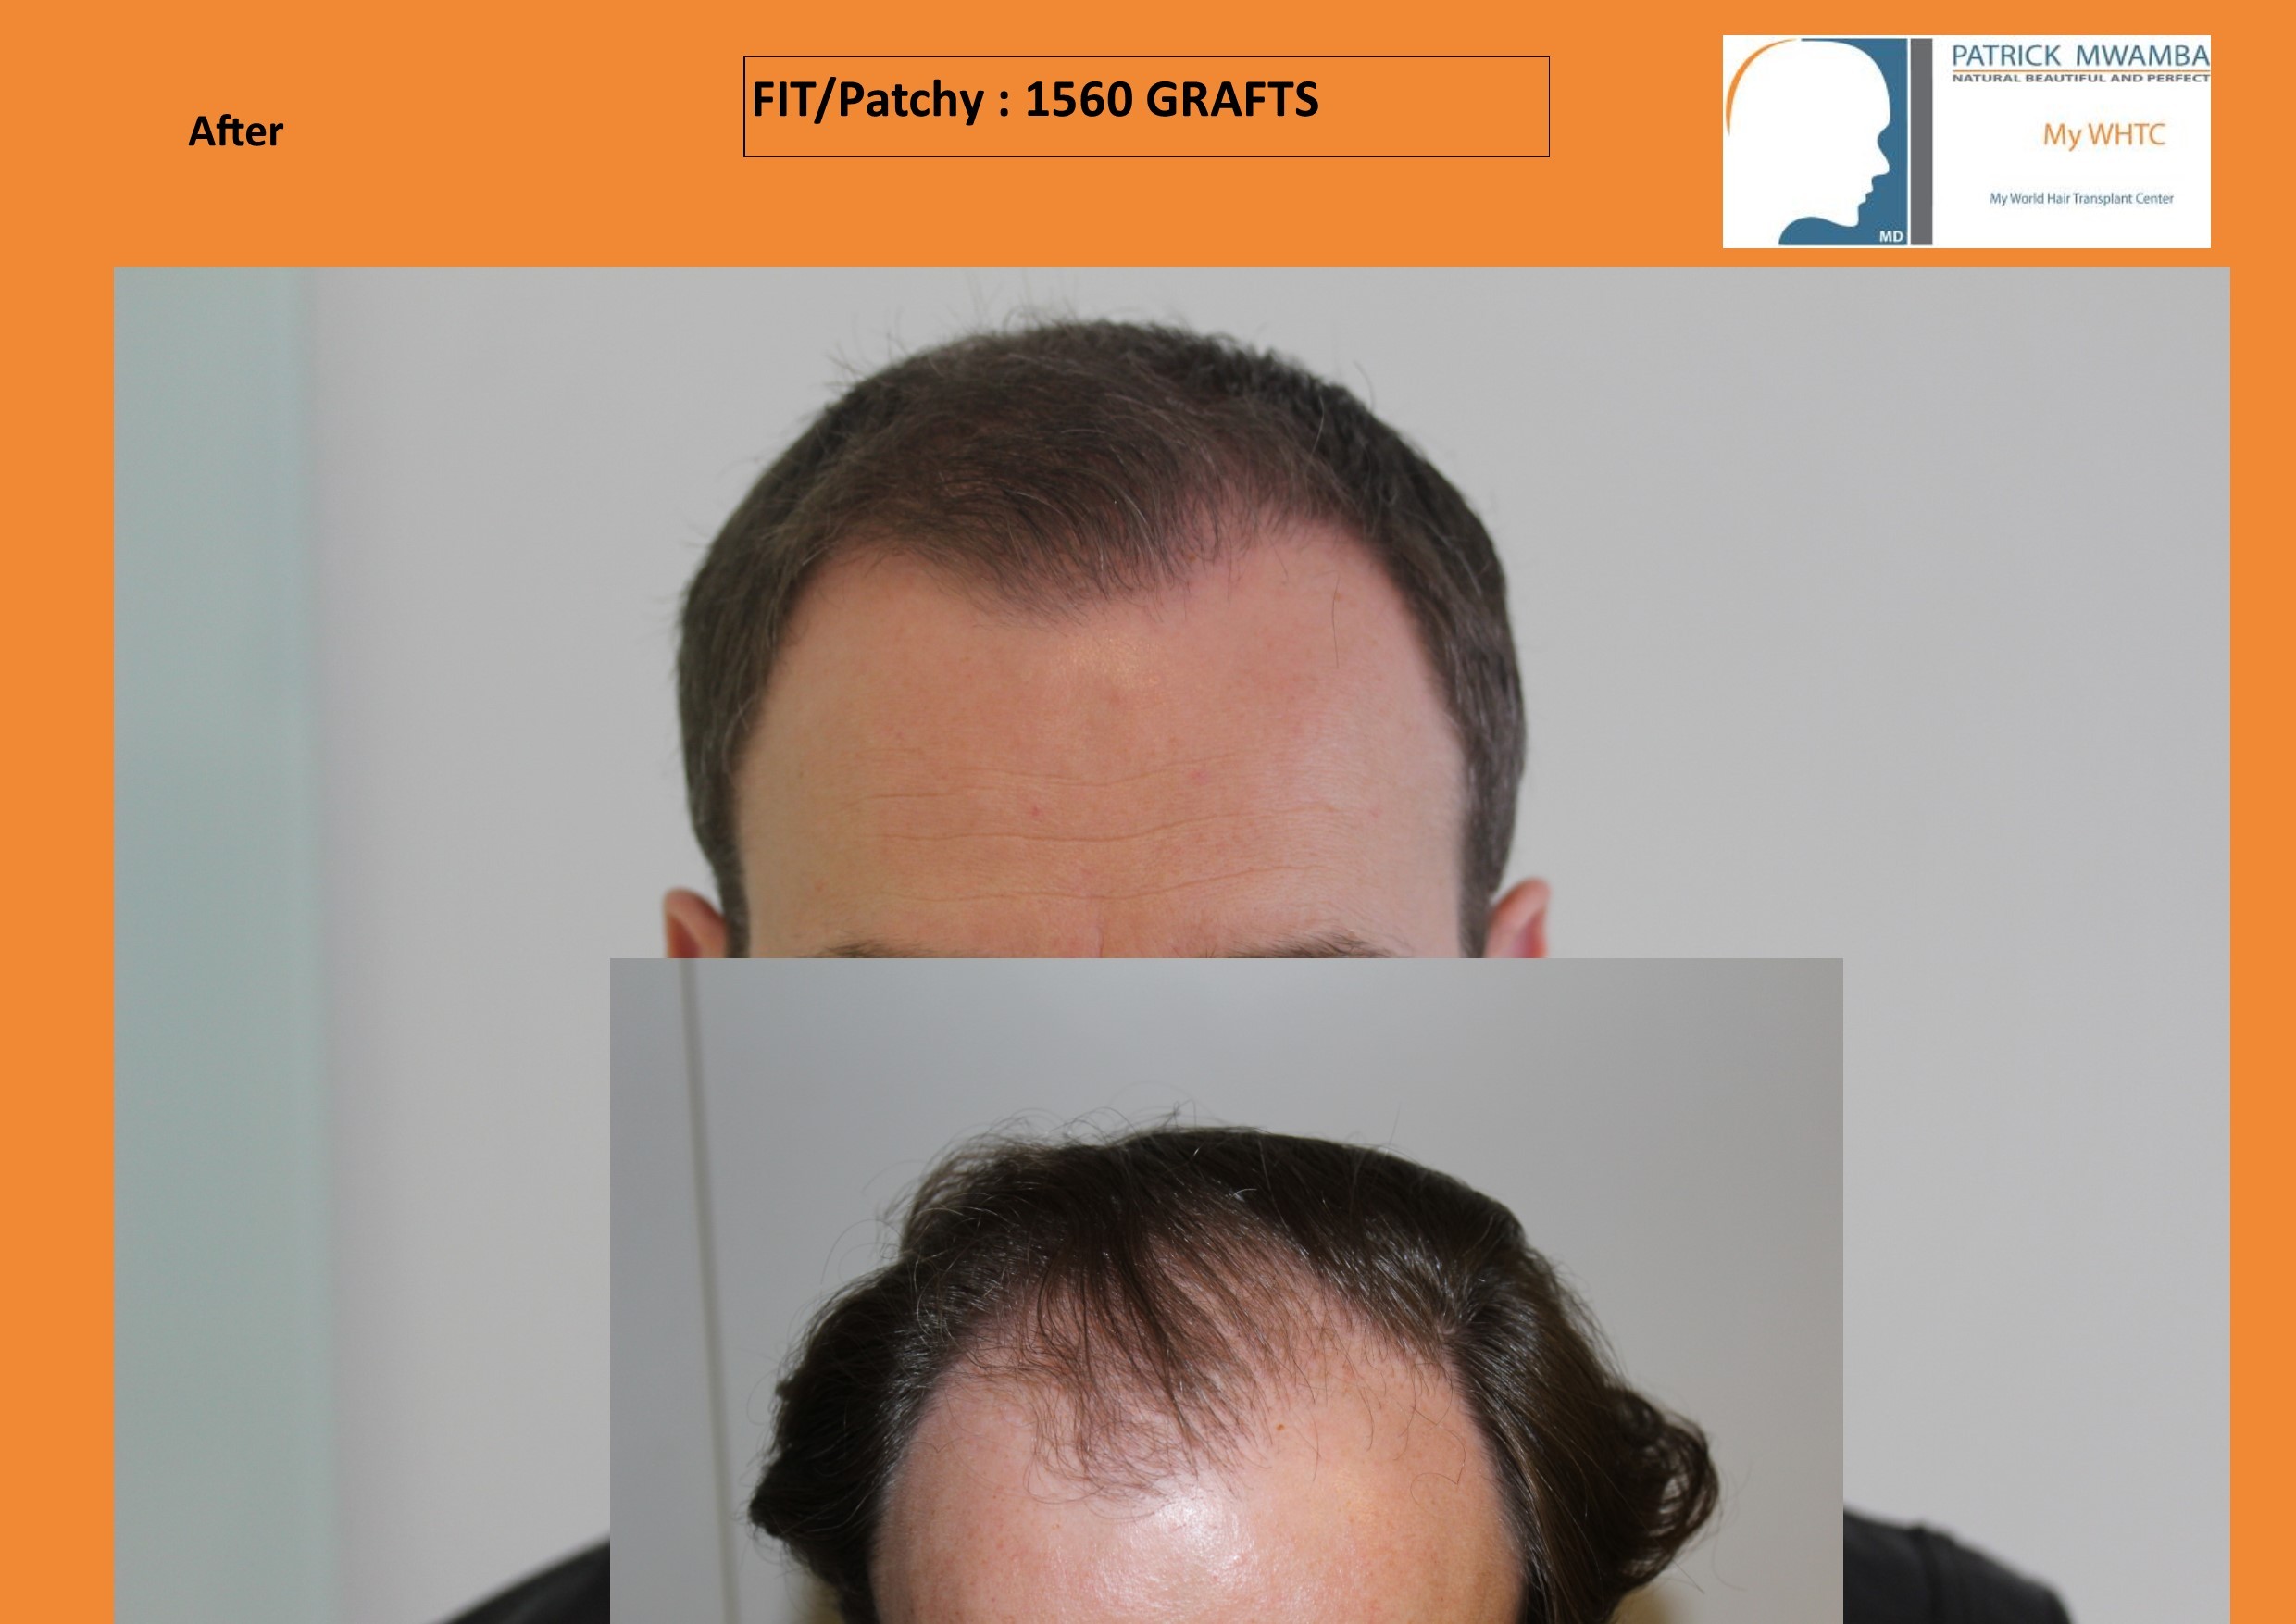 My WHTC + Dr Patrick Mwamba -1560 grafts FUE by FIT patchy shaven | Hair  loss Forum - Hair Transplant forums